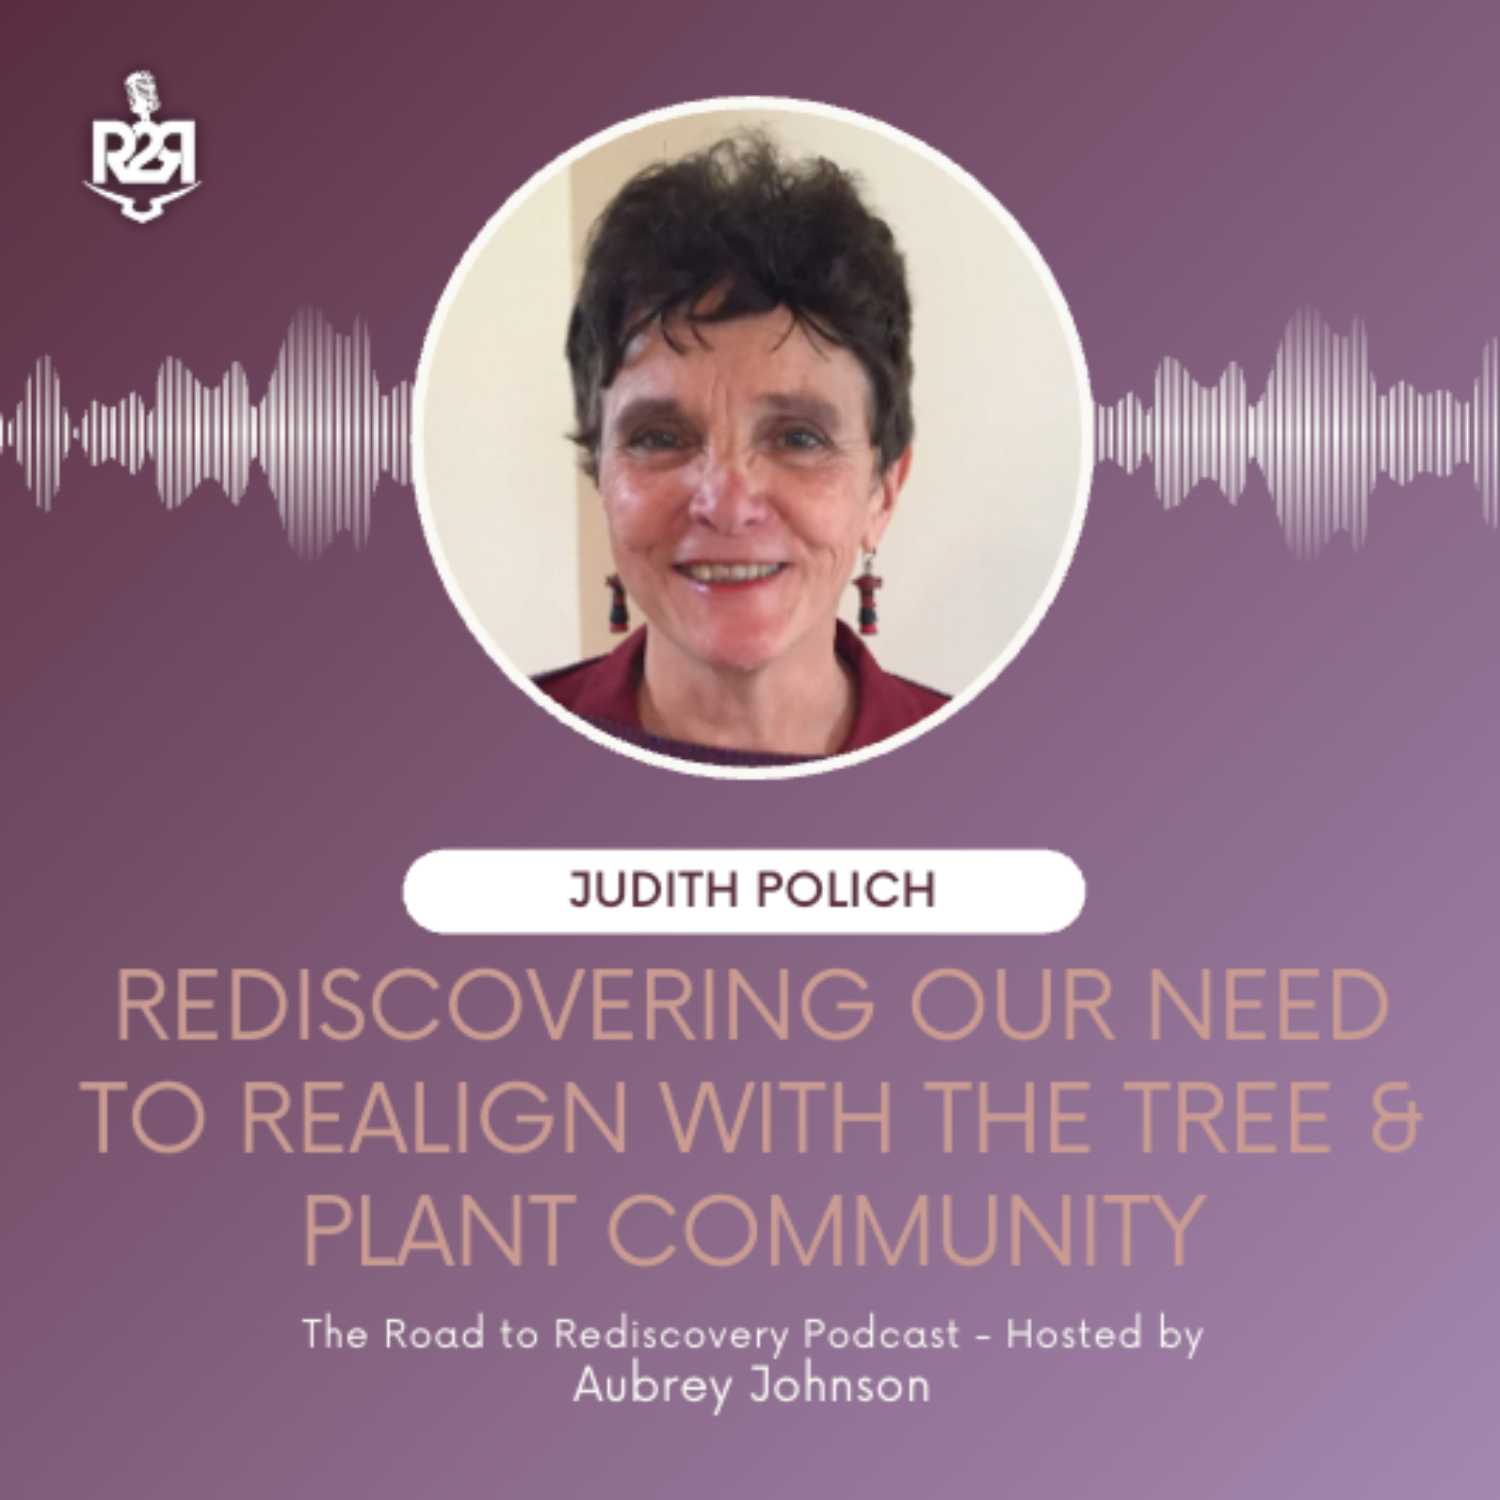 Rediscover our need to realign with the Tree & Plant Community, with Judith Polich